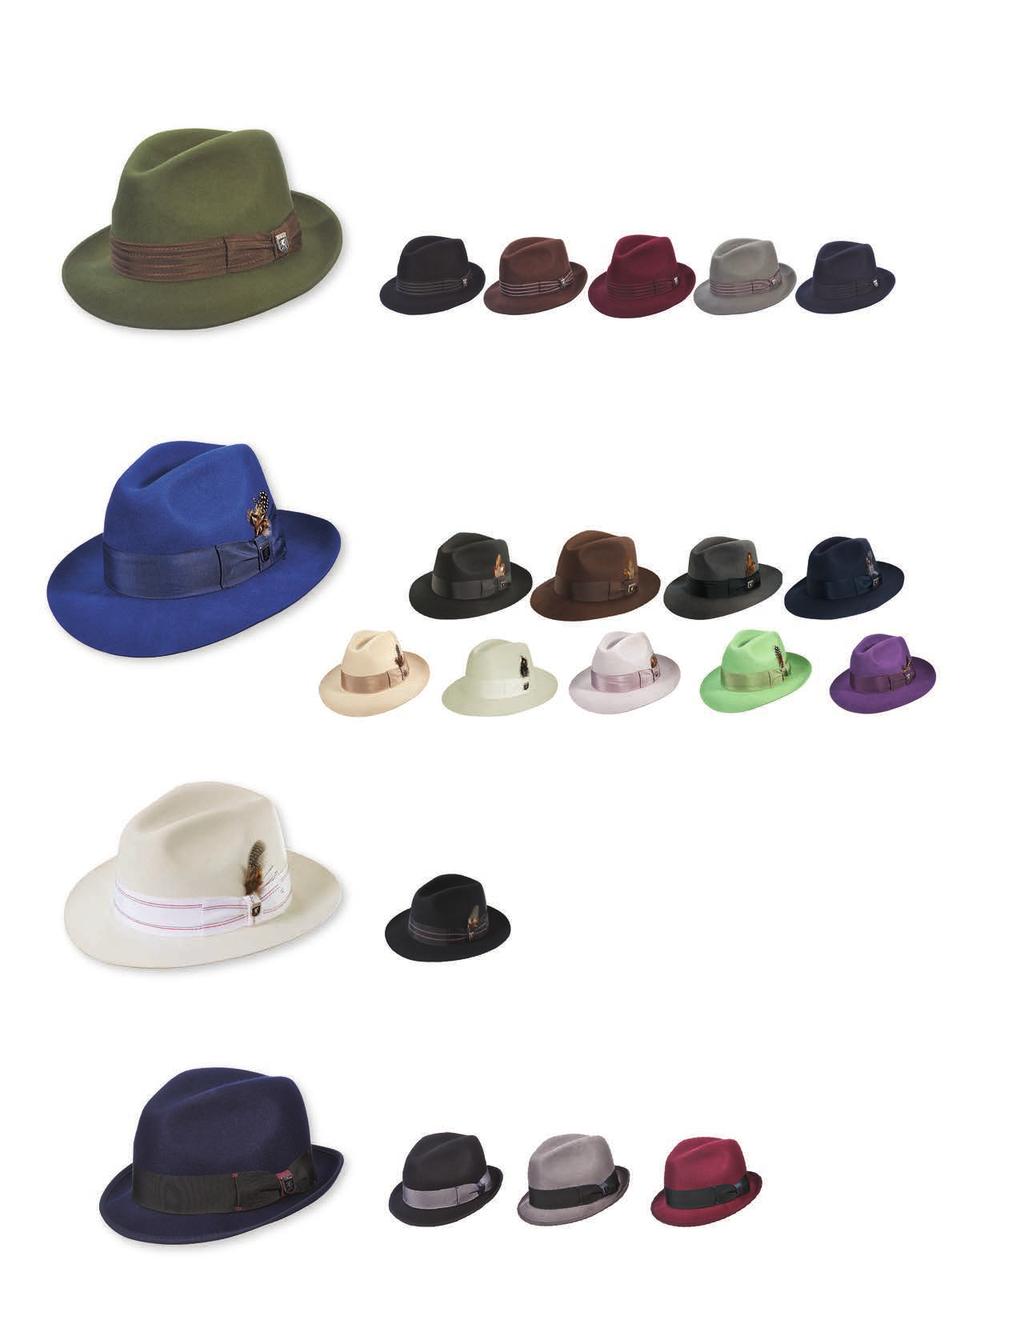 SAW647 new Shape: Fedora / Material: Wool Felt / Details: Grosgrain, Satin Lining Brim: 2 / Sold by Color:, Brown, Burgundy, Grey, Navy, Sage / Size Pack: 1/S, 2/M, 2/L, 1/XL Also Sold by Size: M-XL